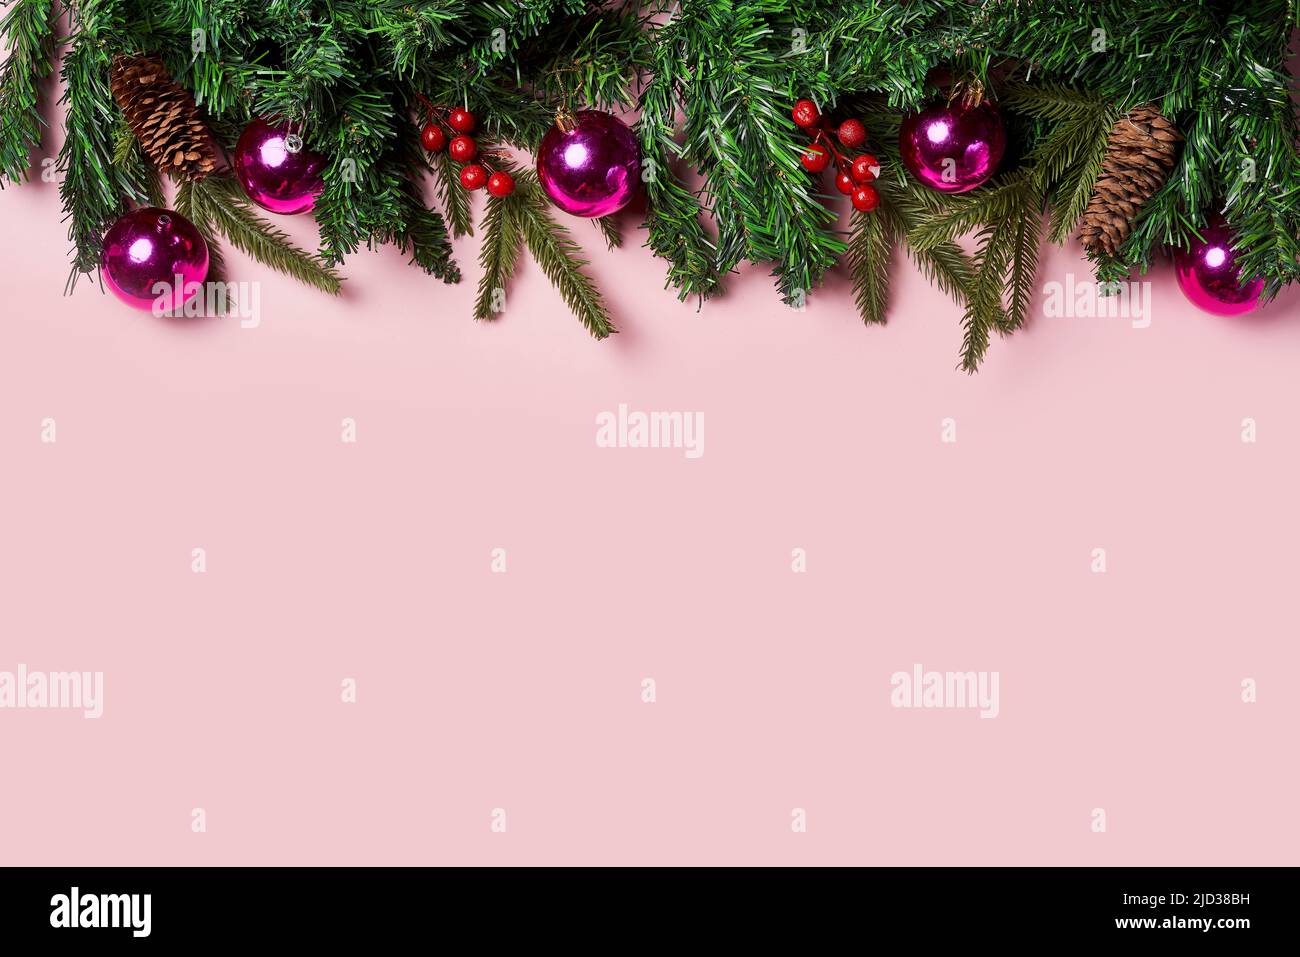 Christmas background with fir tree and decor on pink backgraund. Top view with copy space Stock Photo